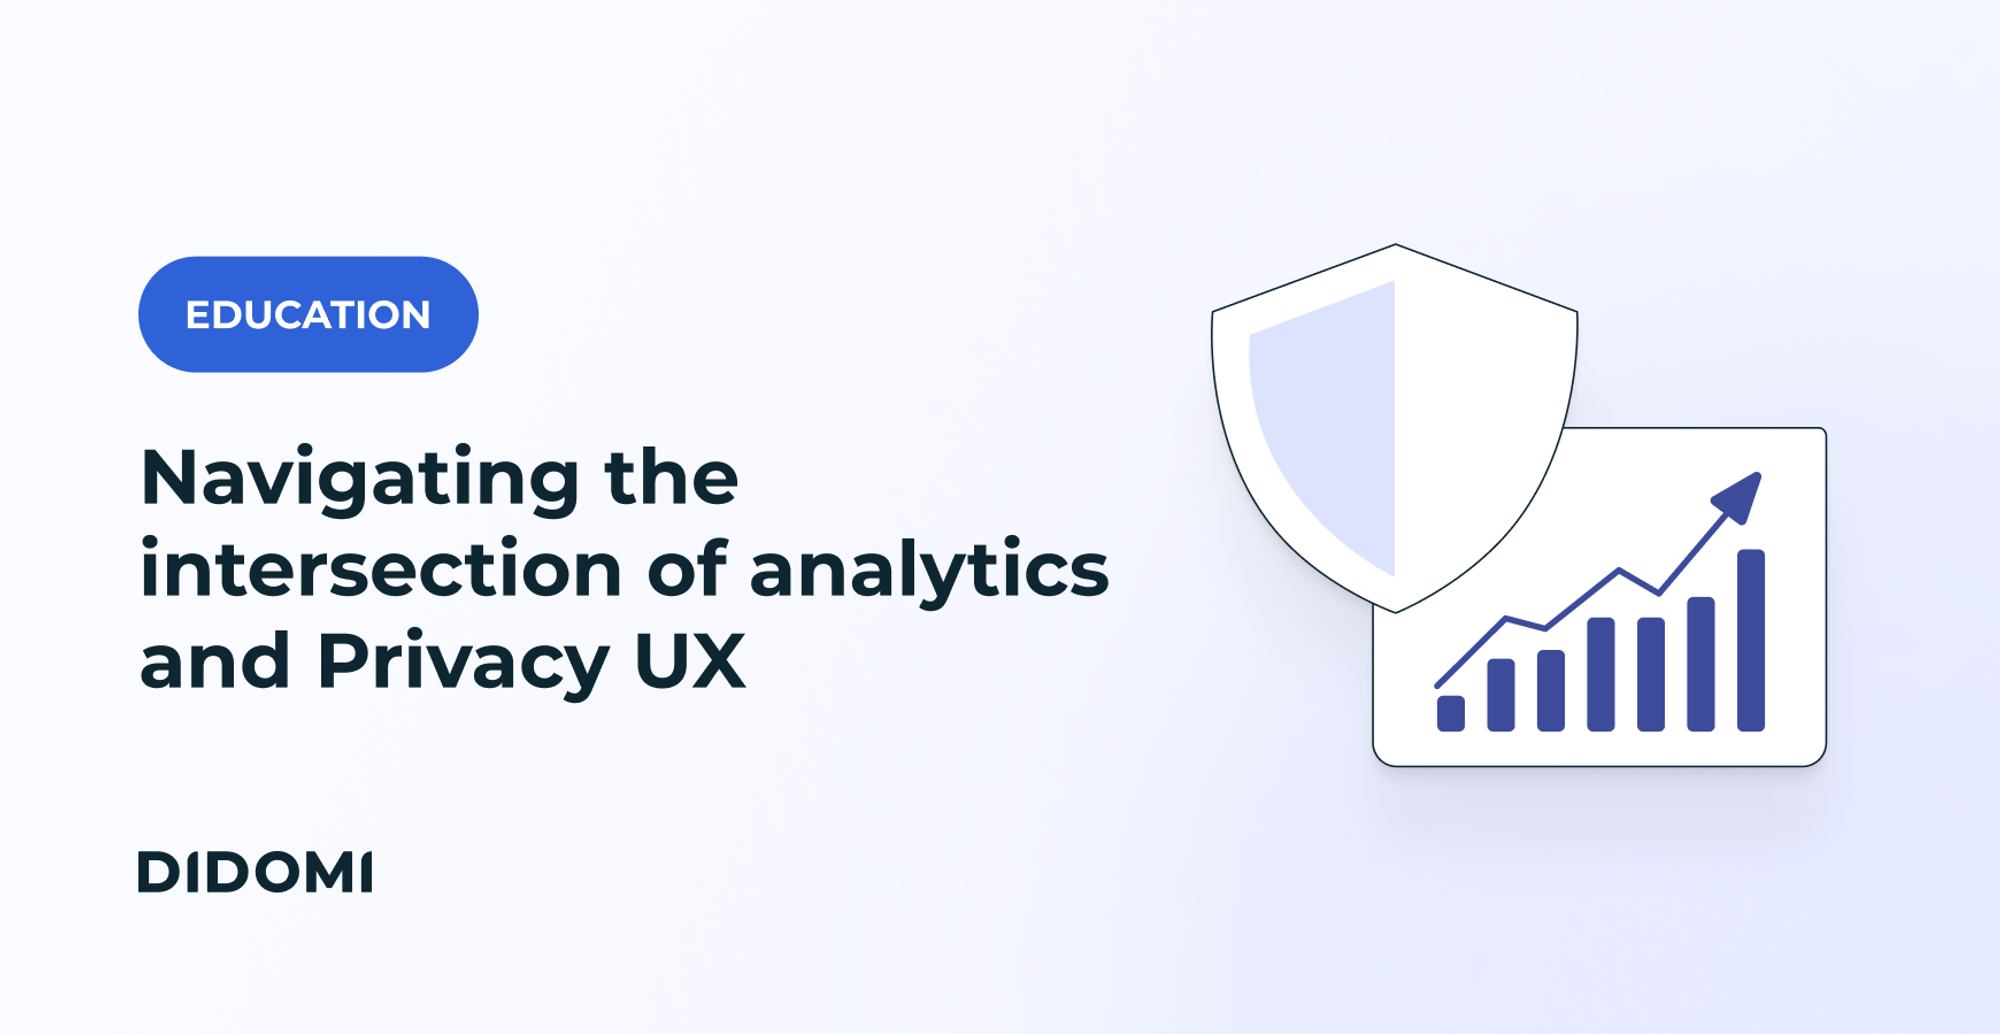 On the right side of the image a drawing of a graph symbolizing analytics, and of a shield symbolizing data privacy, with on the left the tag "Education" and the title "Navigating the intersection of analytics and Privacy UX"